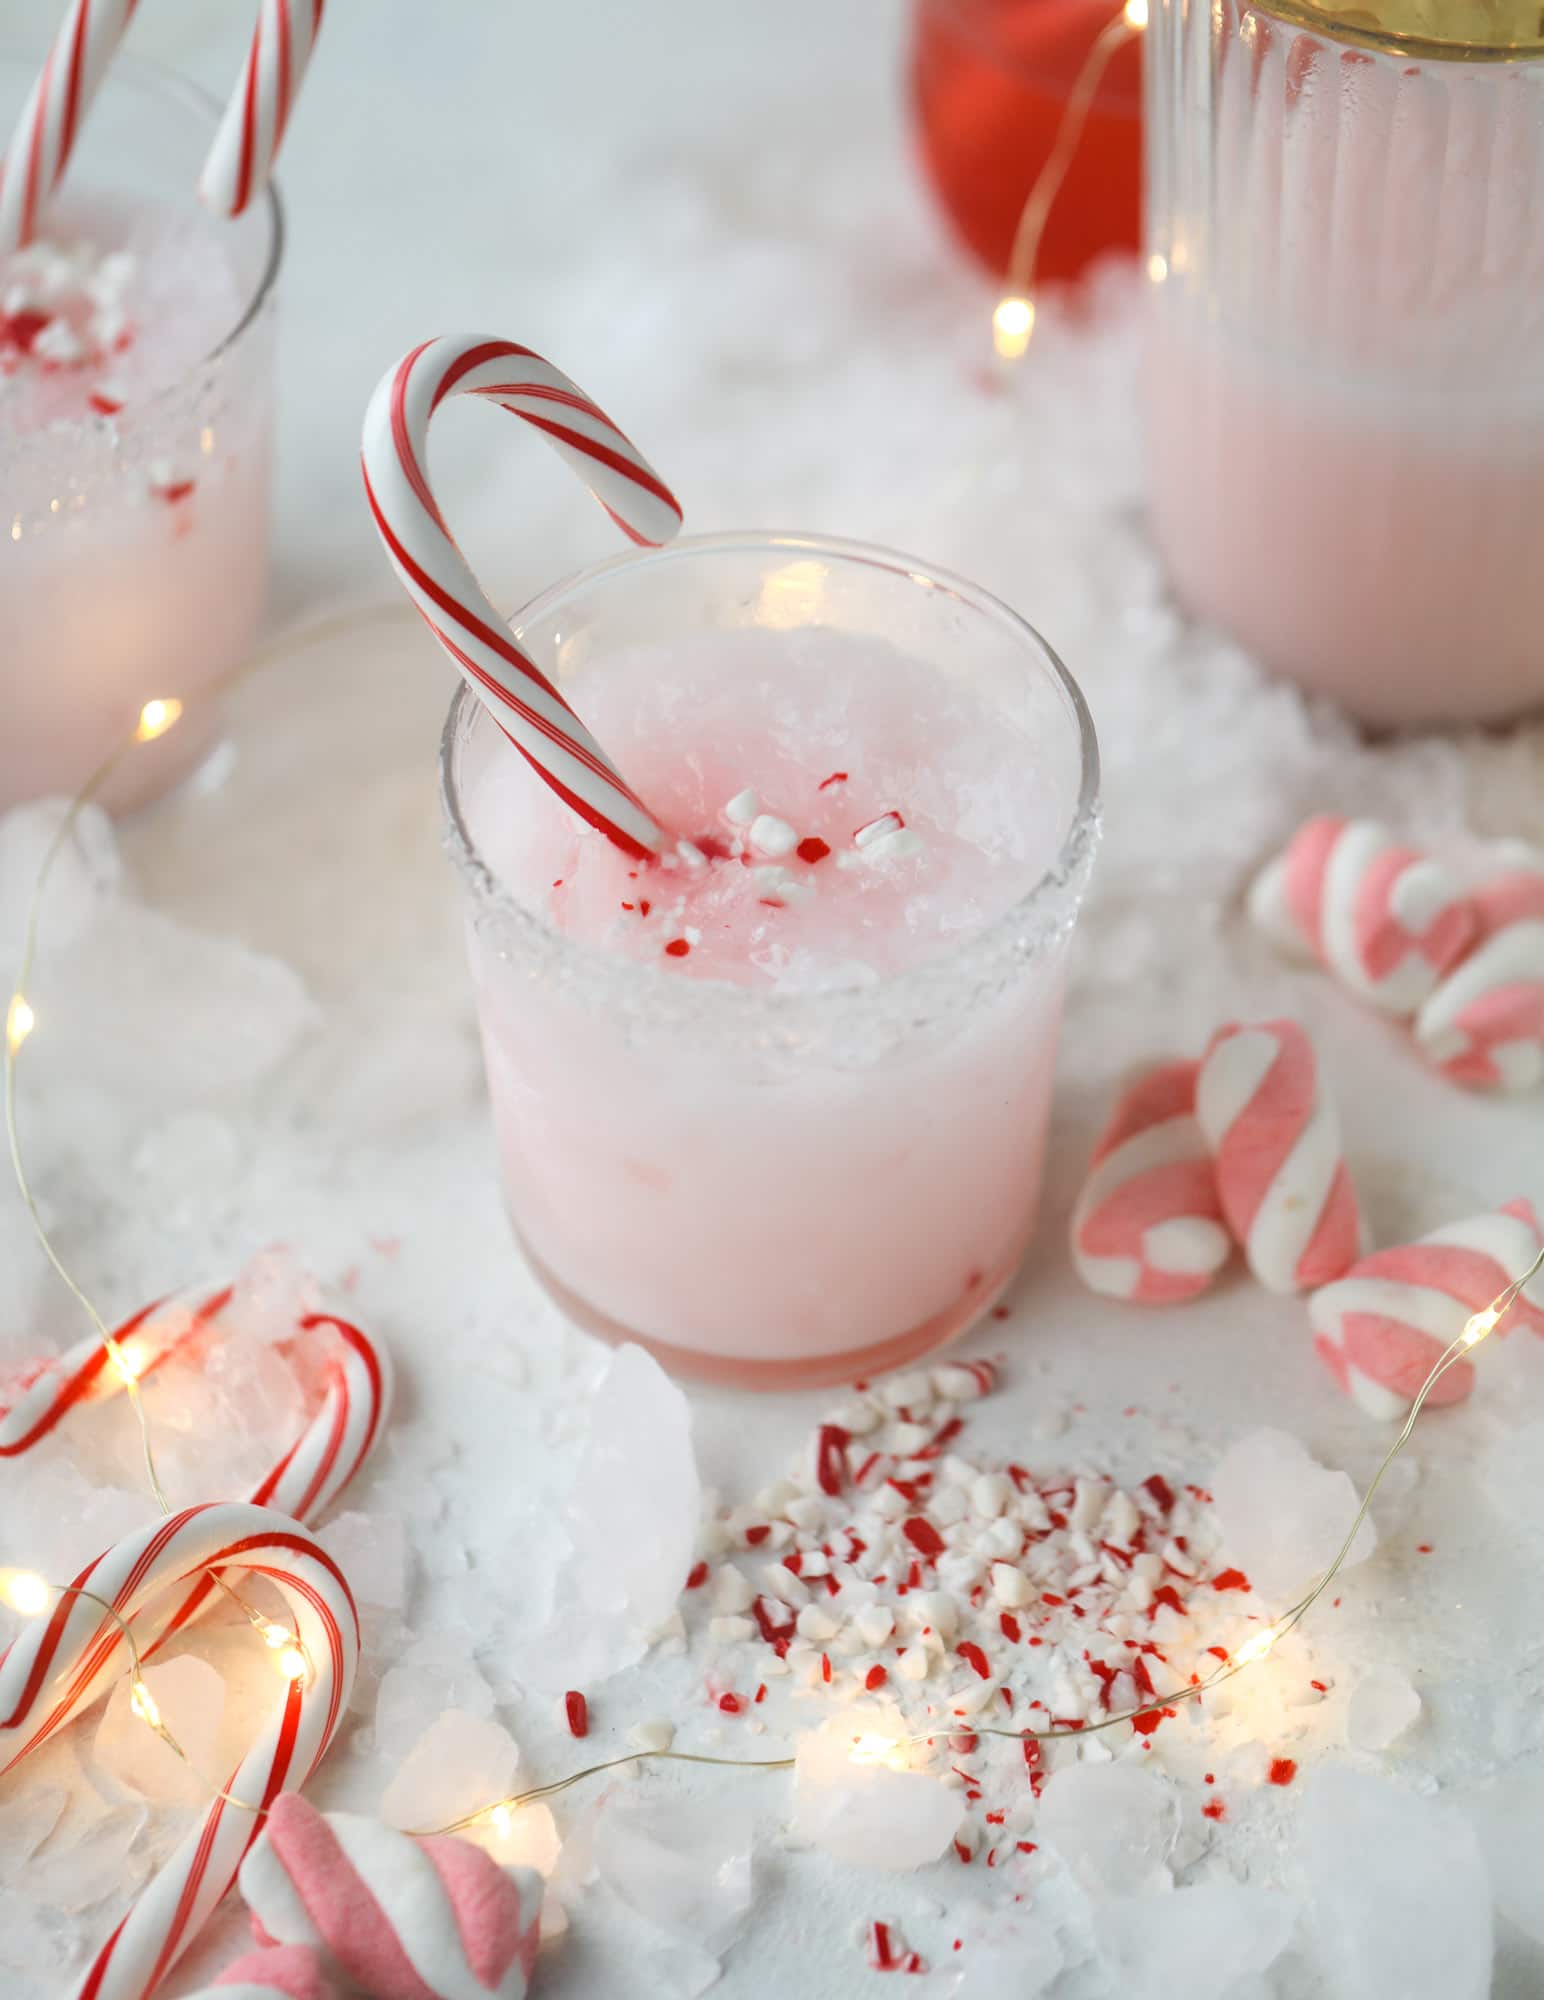 This pink peppermint cocktail is full of holiday cheer! Candy cane vodka, creme de cacao, vanilla and a drop of cream come together to create the perfect iced holiday drink that tastes like a treat! I howsweeteats.com #pinkpeppermint #cocktail